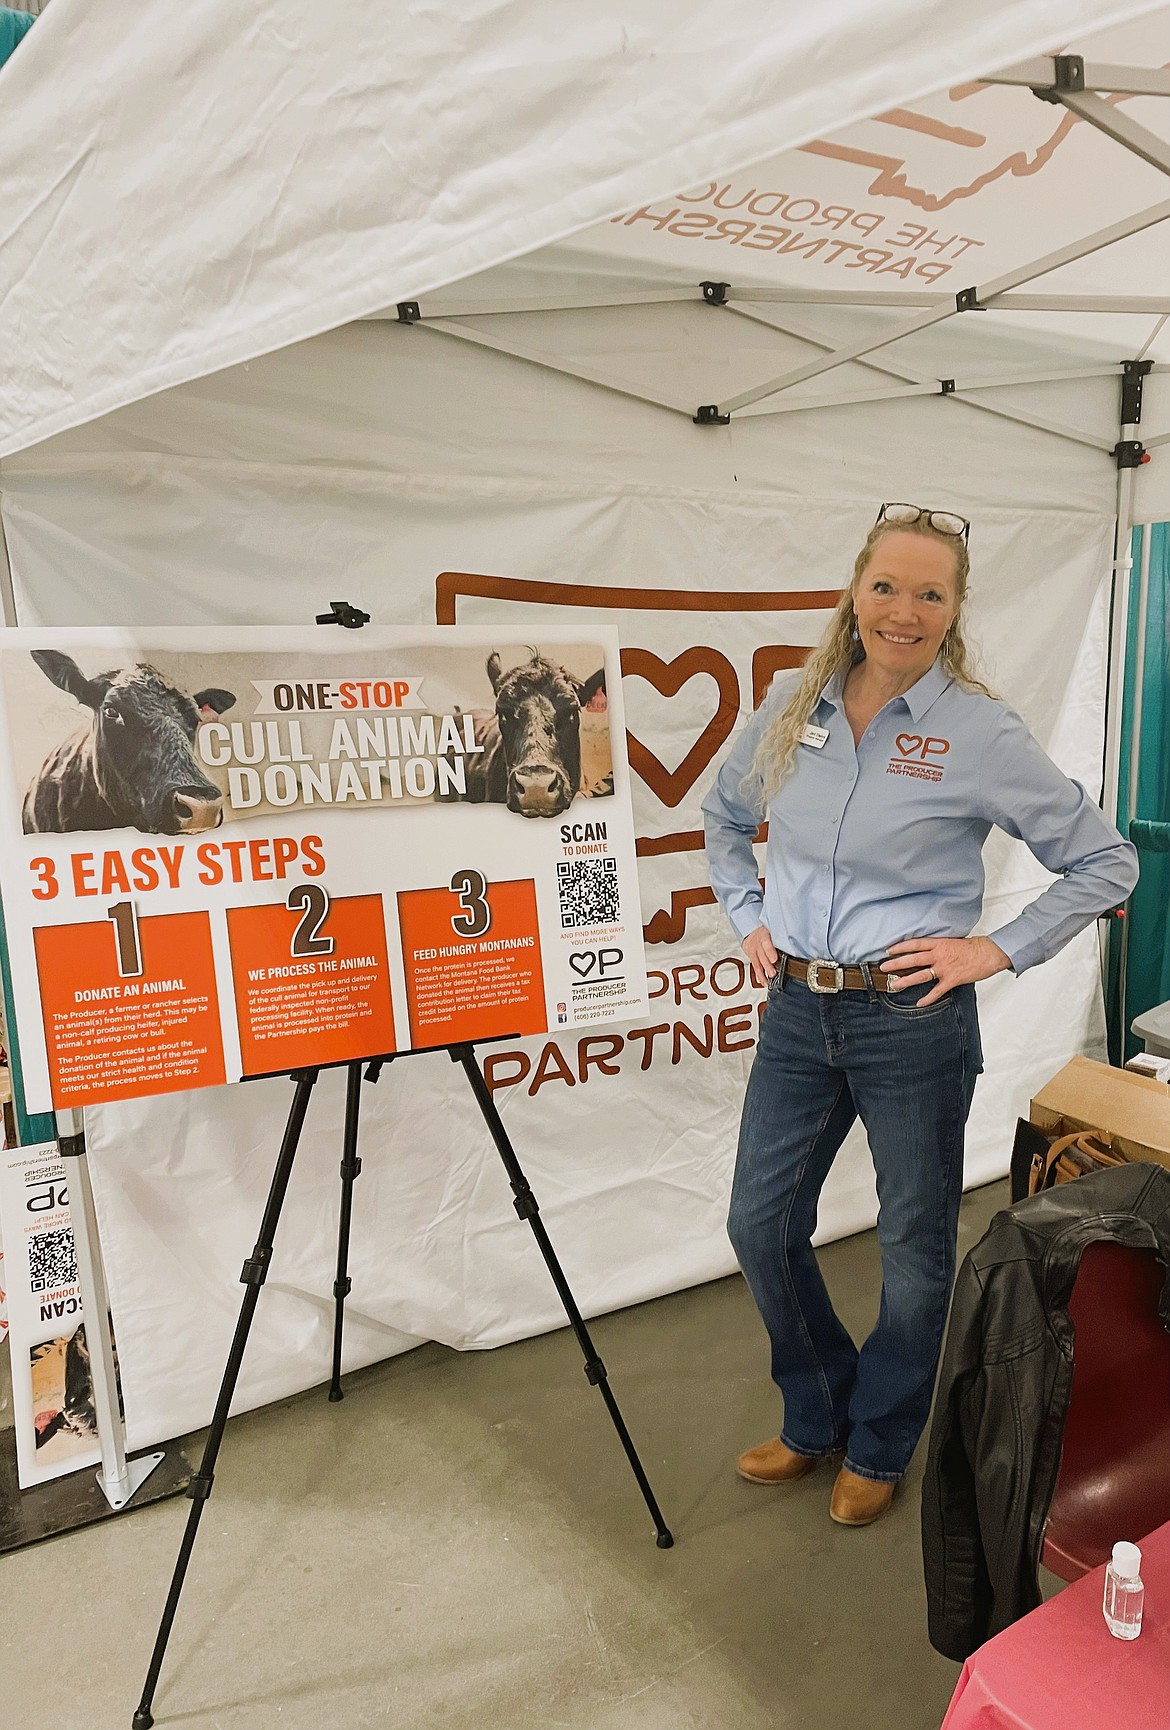 Jeri Delys lives in Frenchtown and is the program Manager for The Producer Partnership based in Livingston, Montana. This is the first of its kind in the private sector of helping the hungry and providing a tax incentive to ranchers who care to donate a cull animal to their organization.